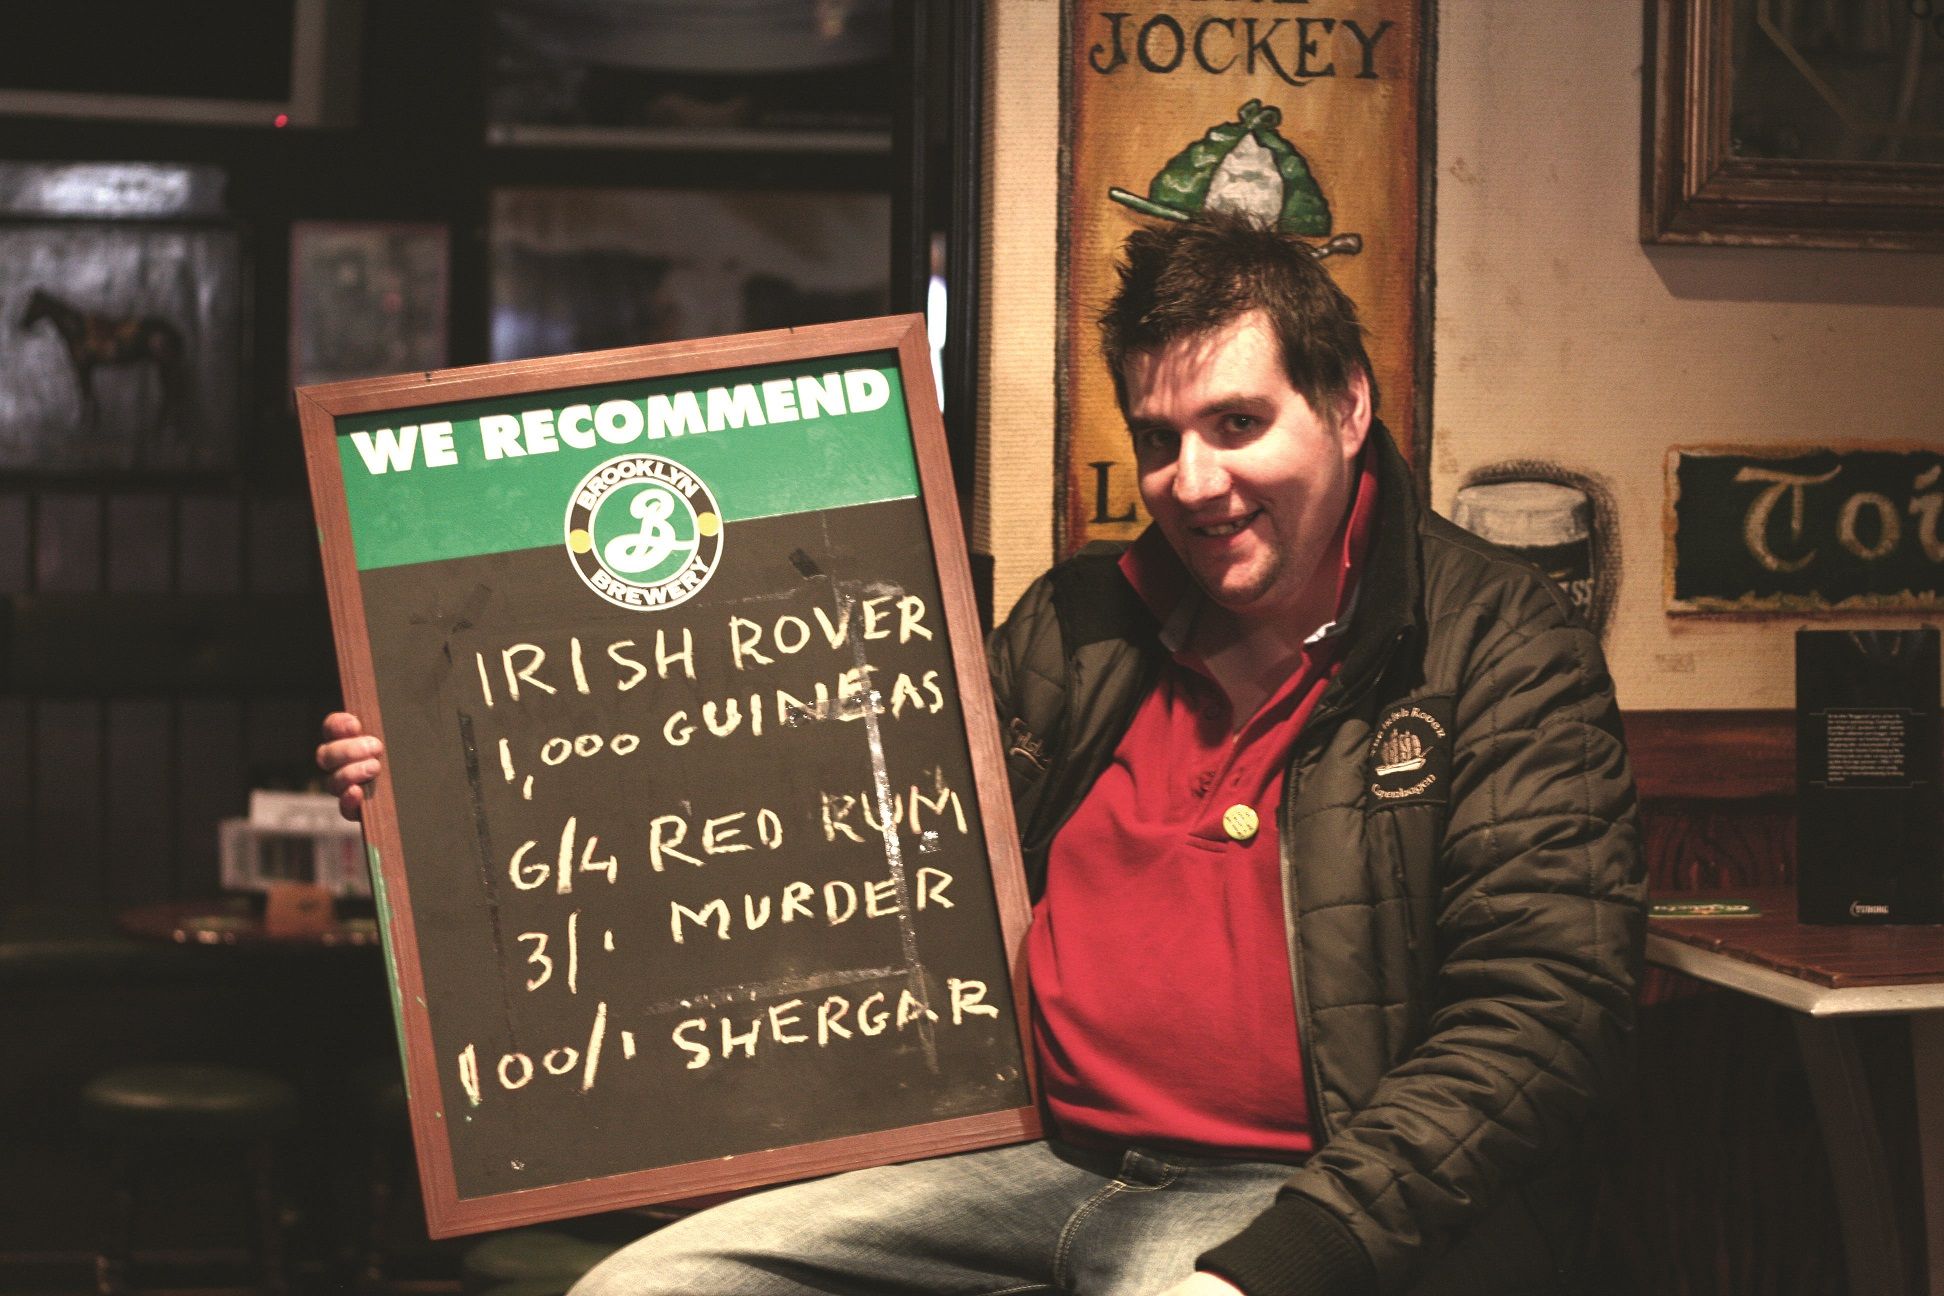 End of an era at the Irish Rover, and the beginning of a new one